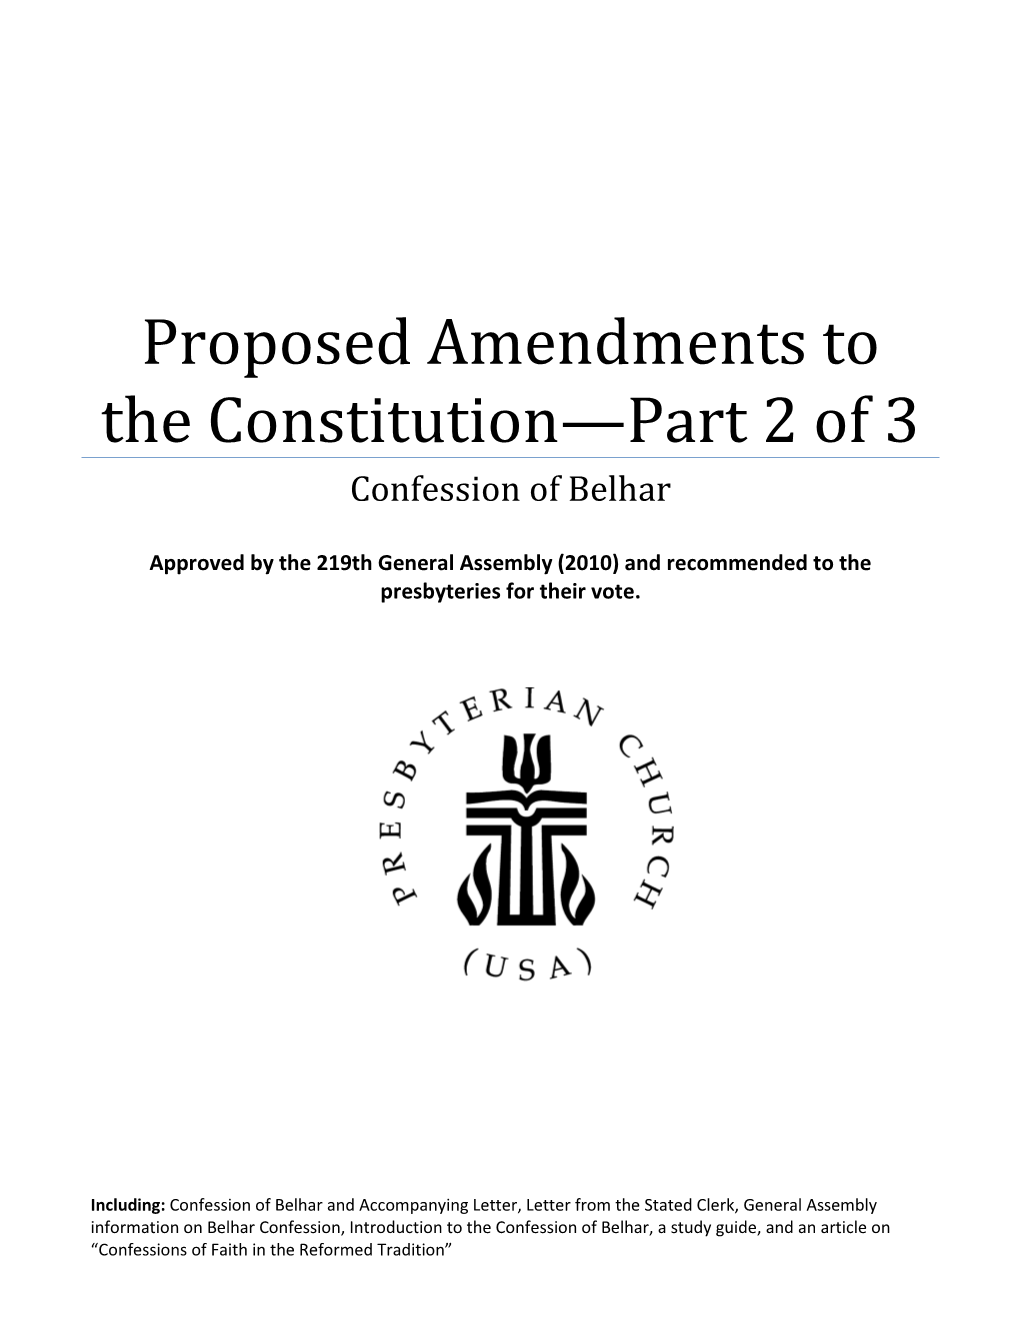 Proposed Amendments to the Constitution—Part 1 of 3